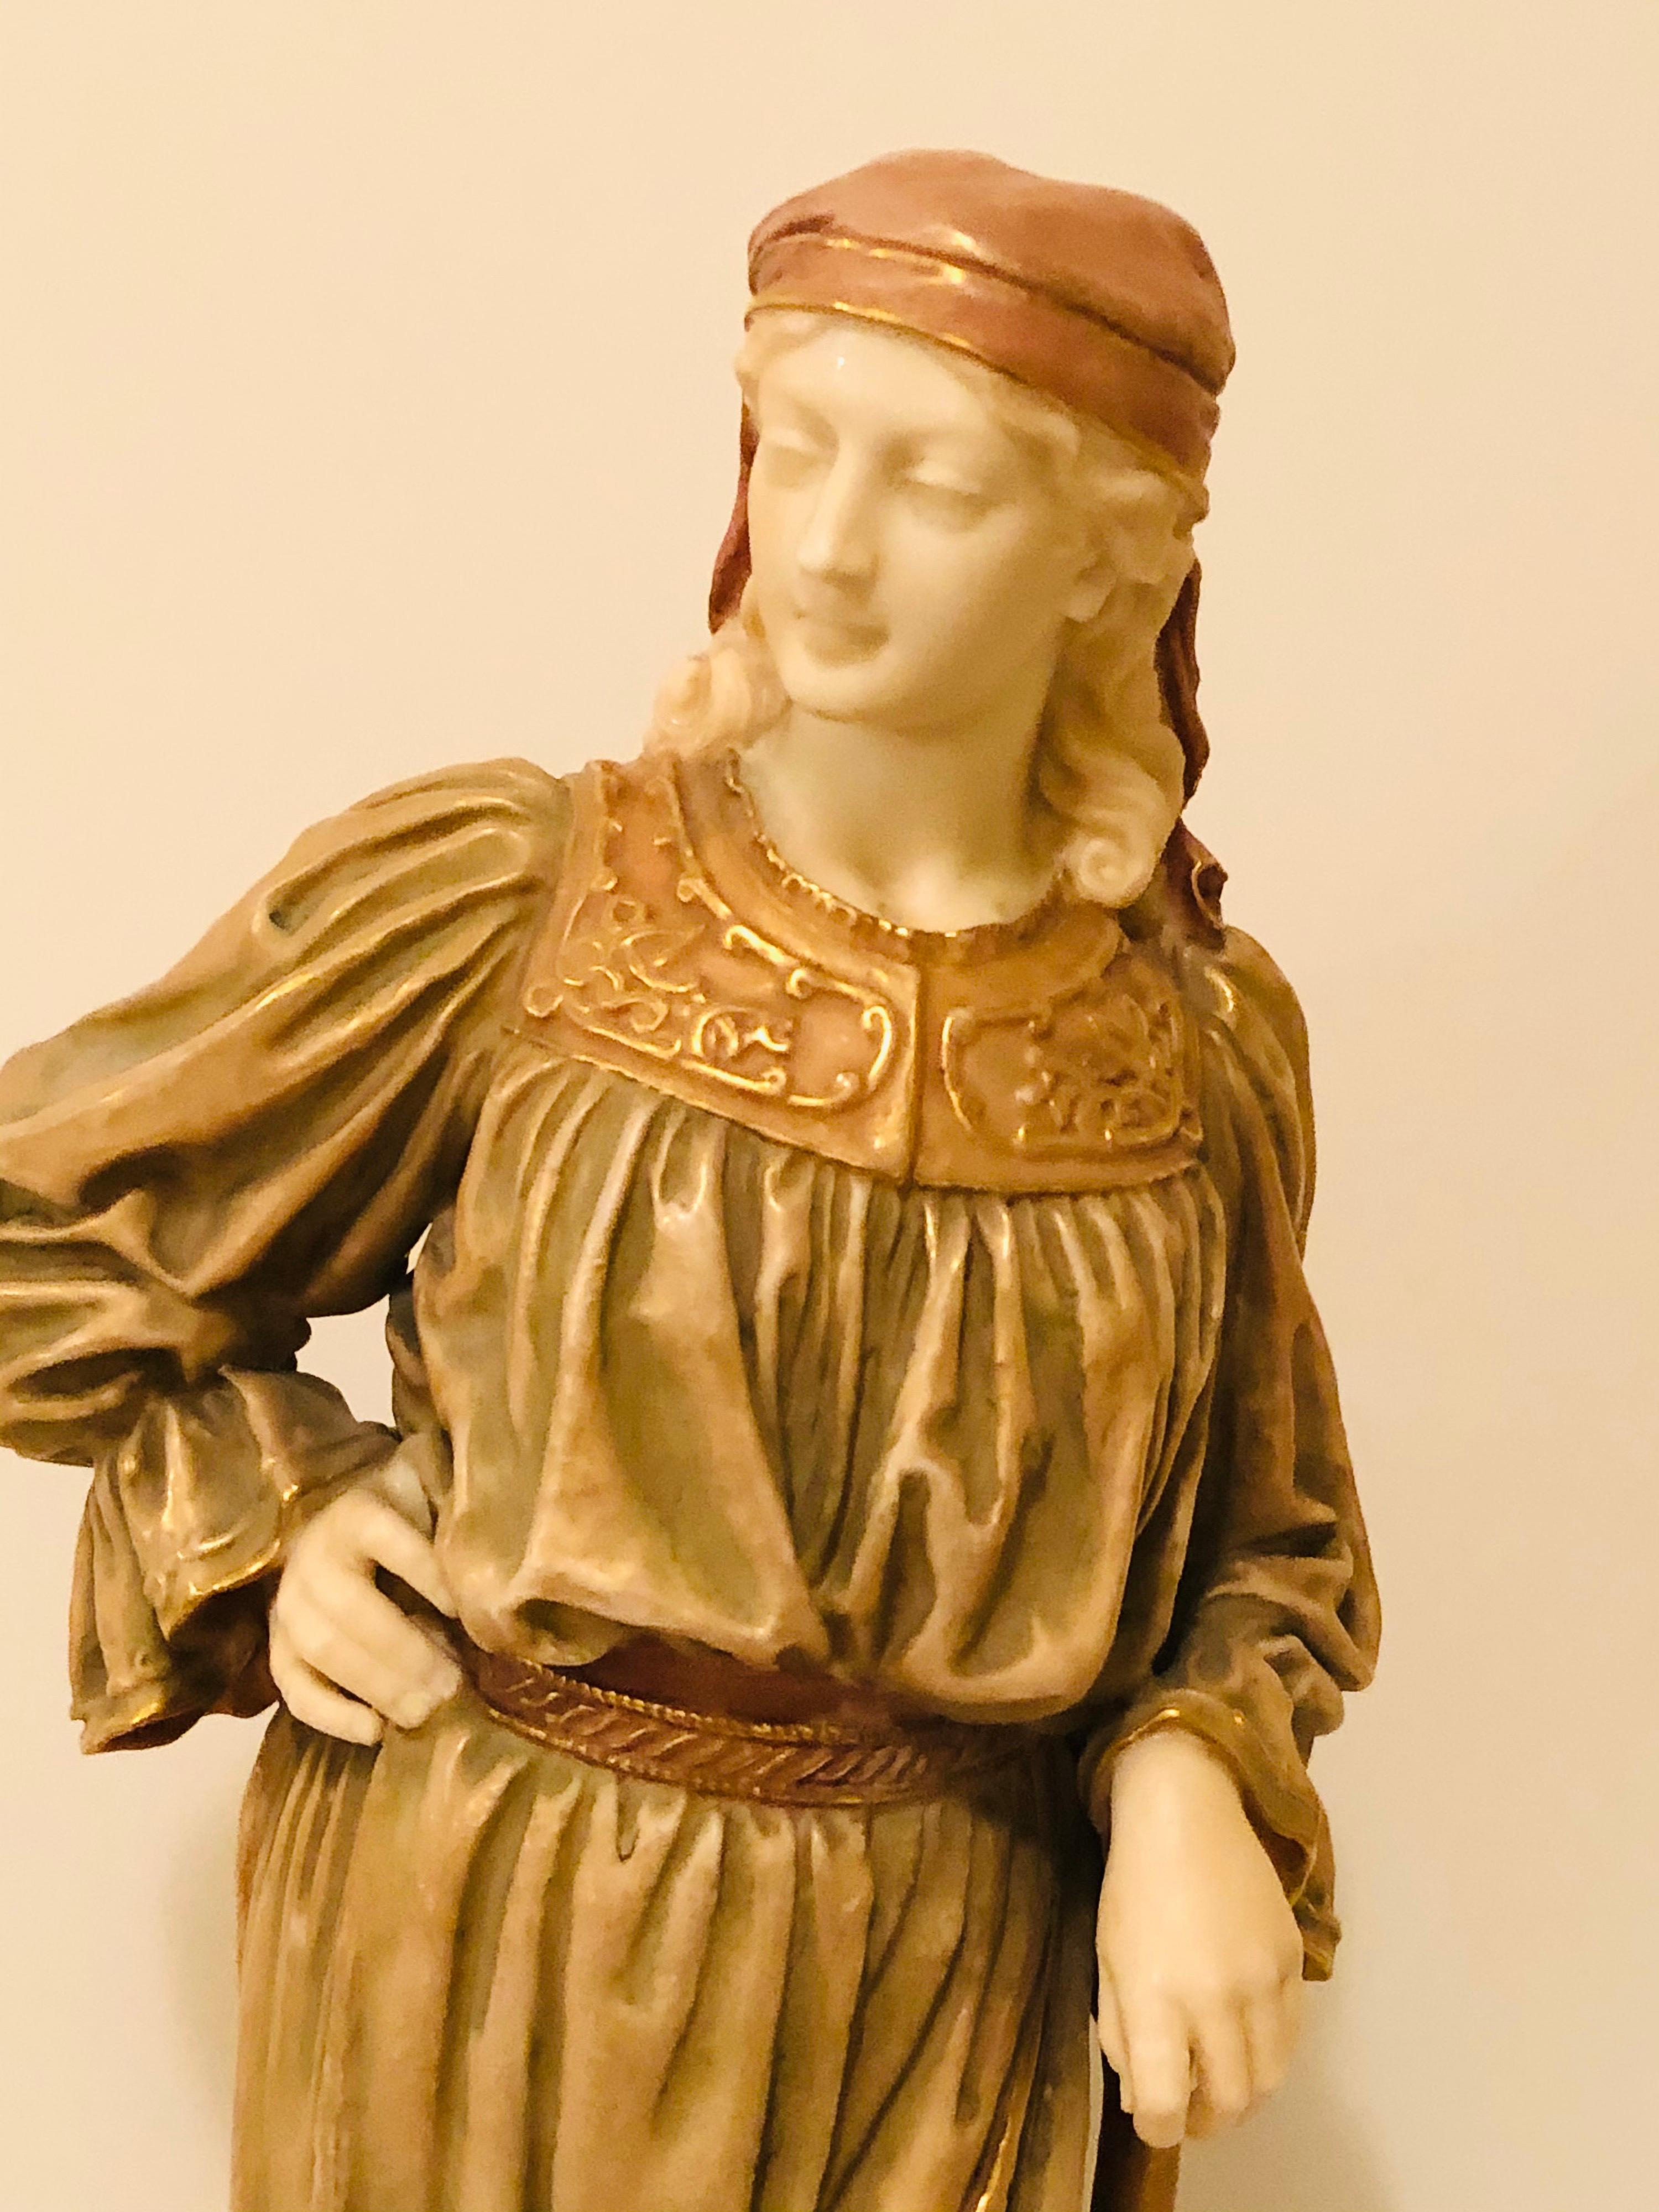 I would like to present you with this amazing Royal Worcester figure of a beautiful lady gardener. She looks like a shepherdess with a long flowing dress and turban type headdress. She has a lot of detail including her ruffled sleeves and her work